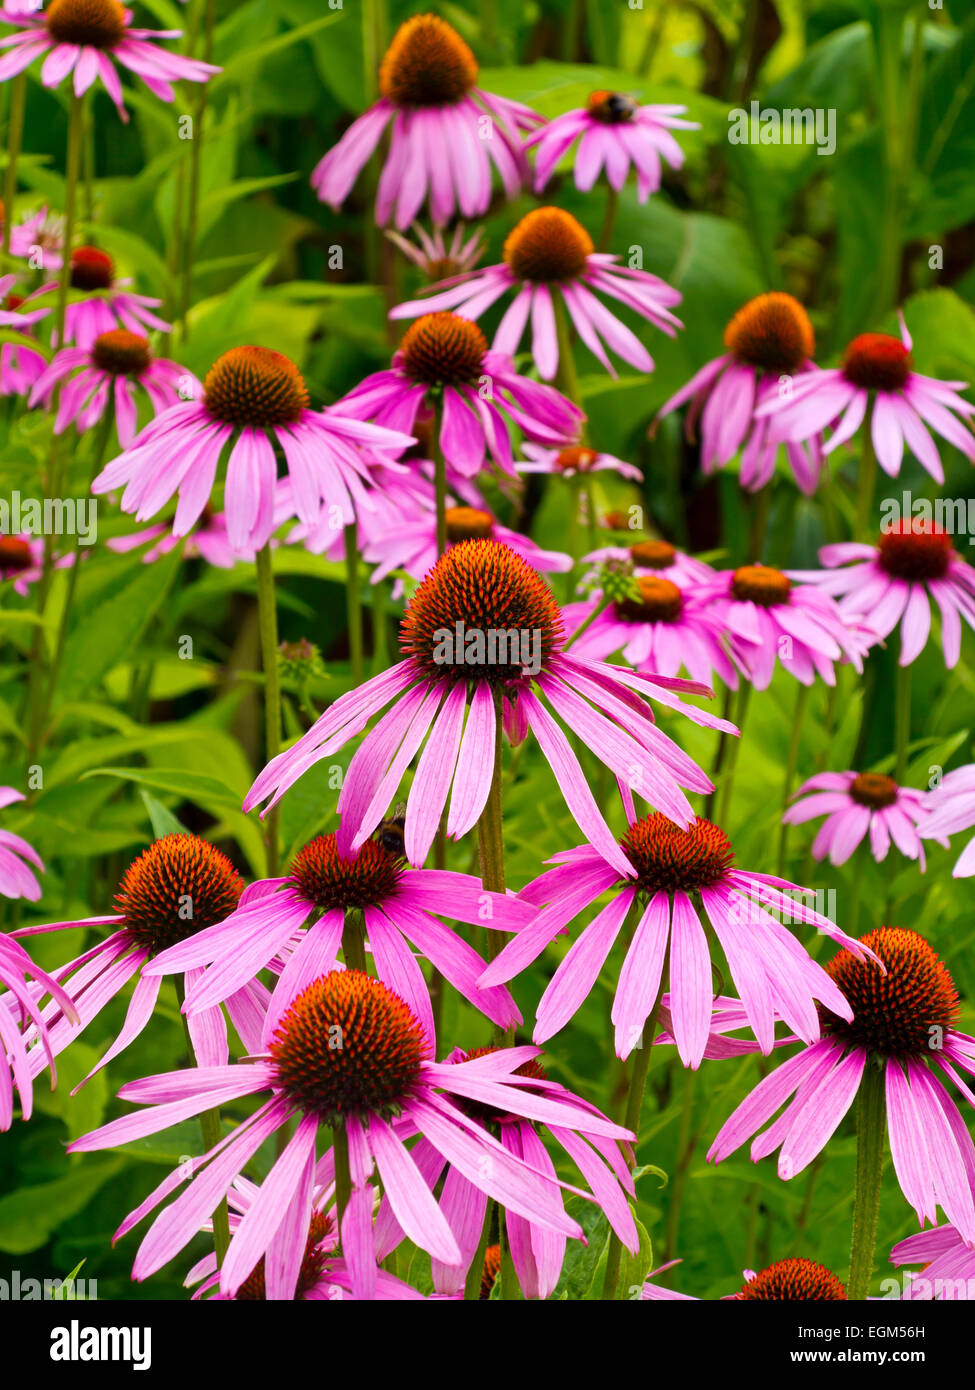 Echinacea purpurea flowers growing in summer an herbaceous flowering plant with medicinal uses also known as coneflower Stock Photo